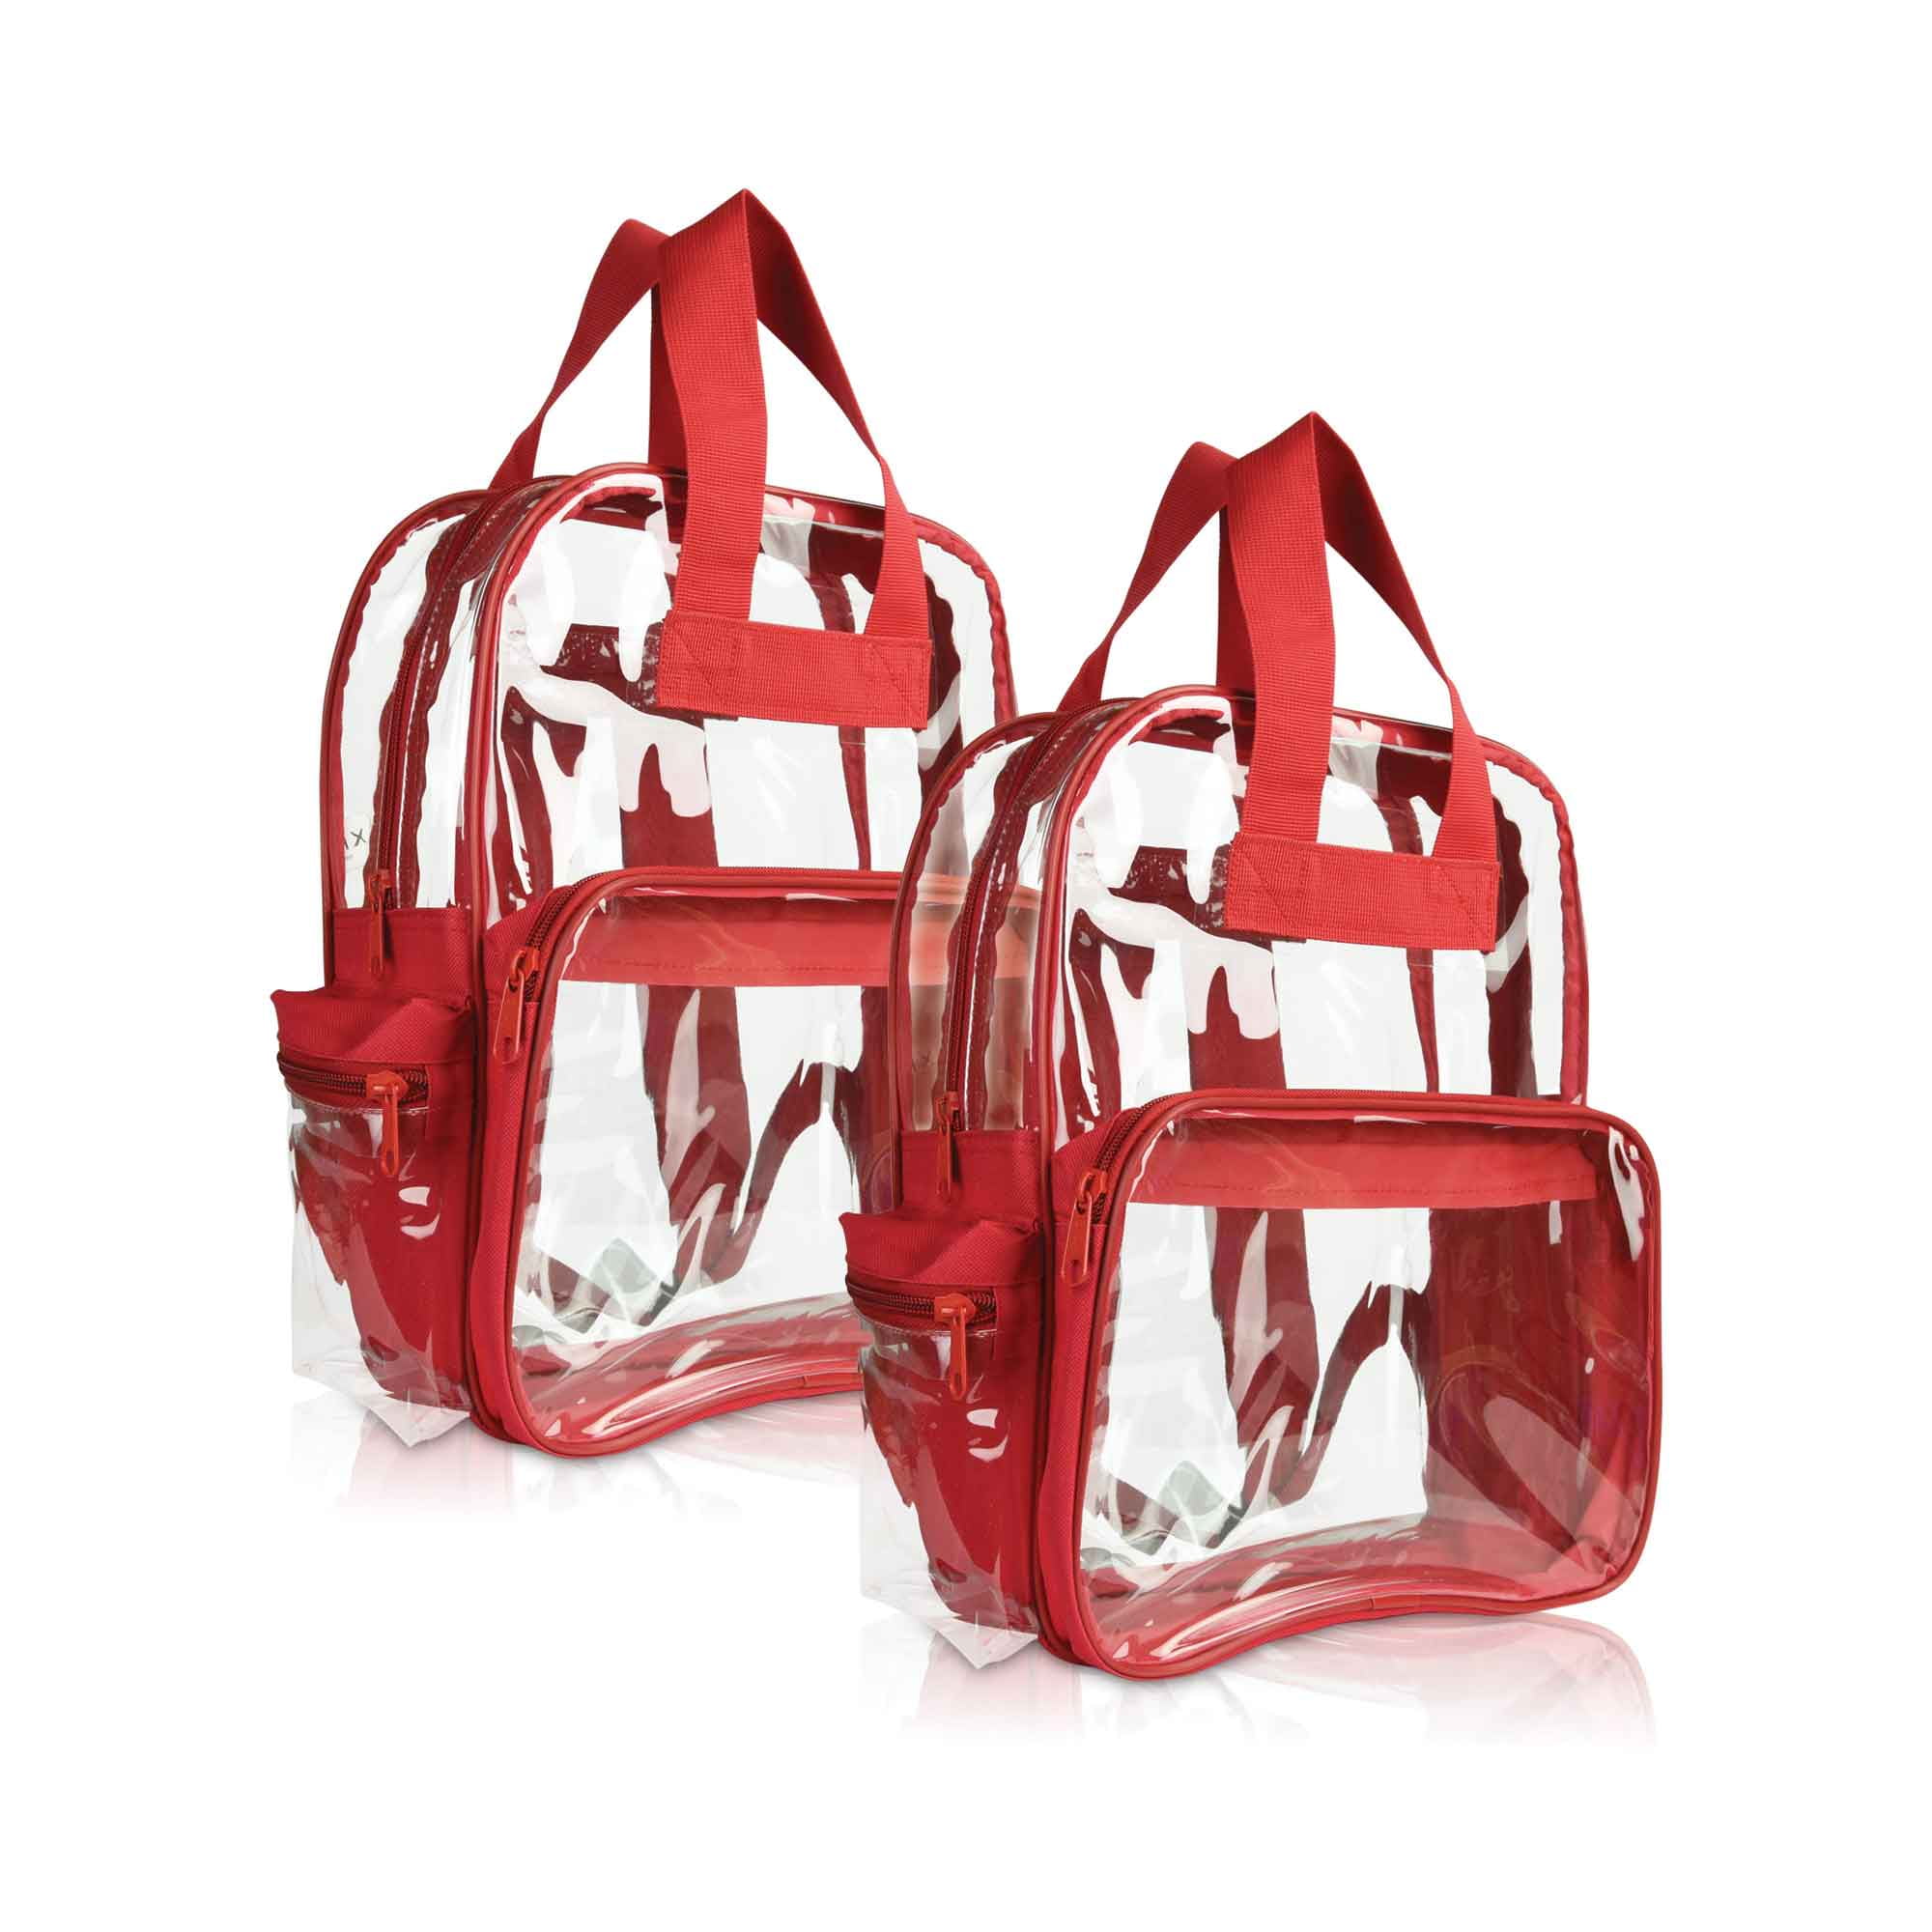 DALIX Clear Backpack School Pack See Through Bag FREE SHIPPING 12 PACK 